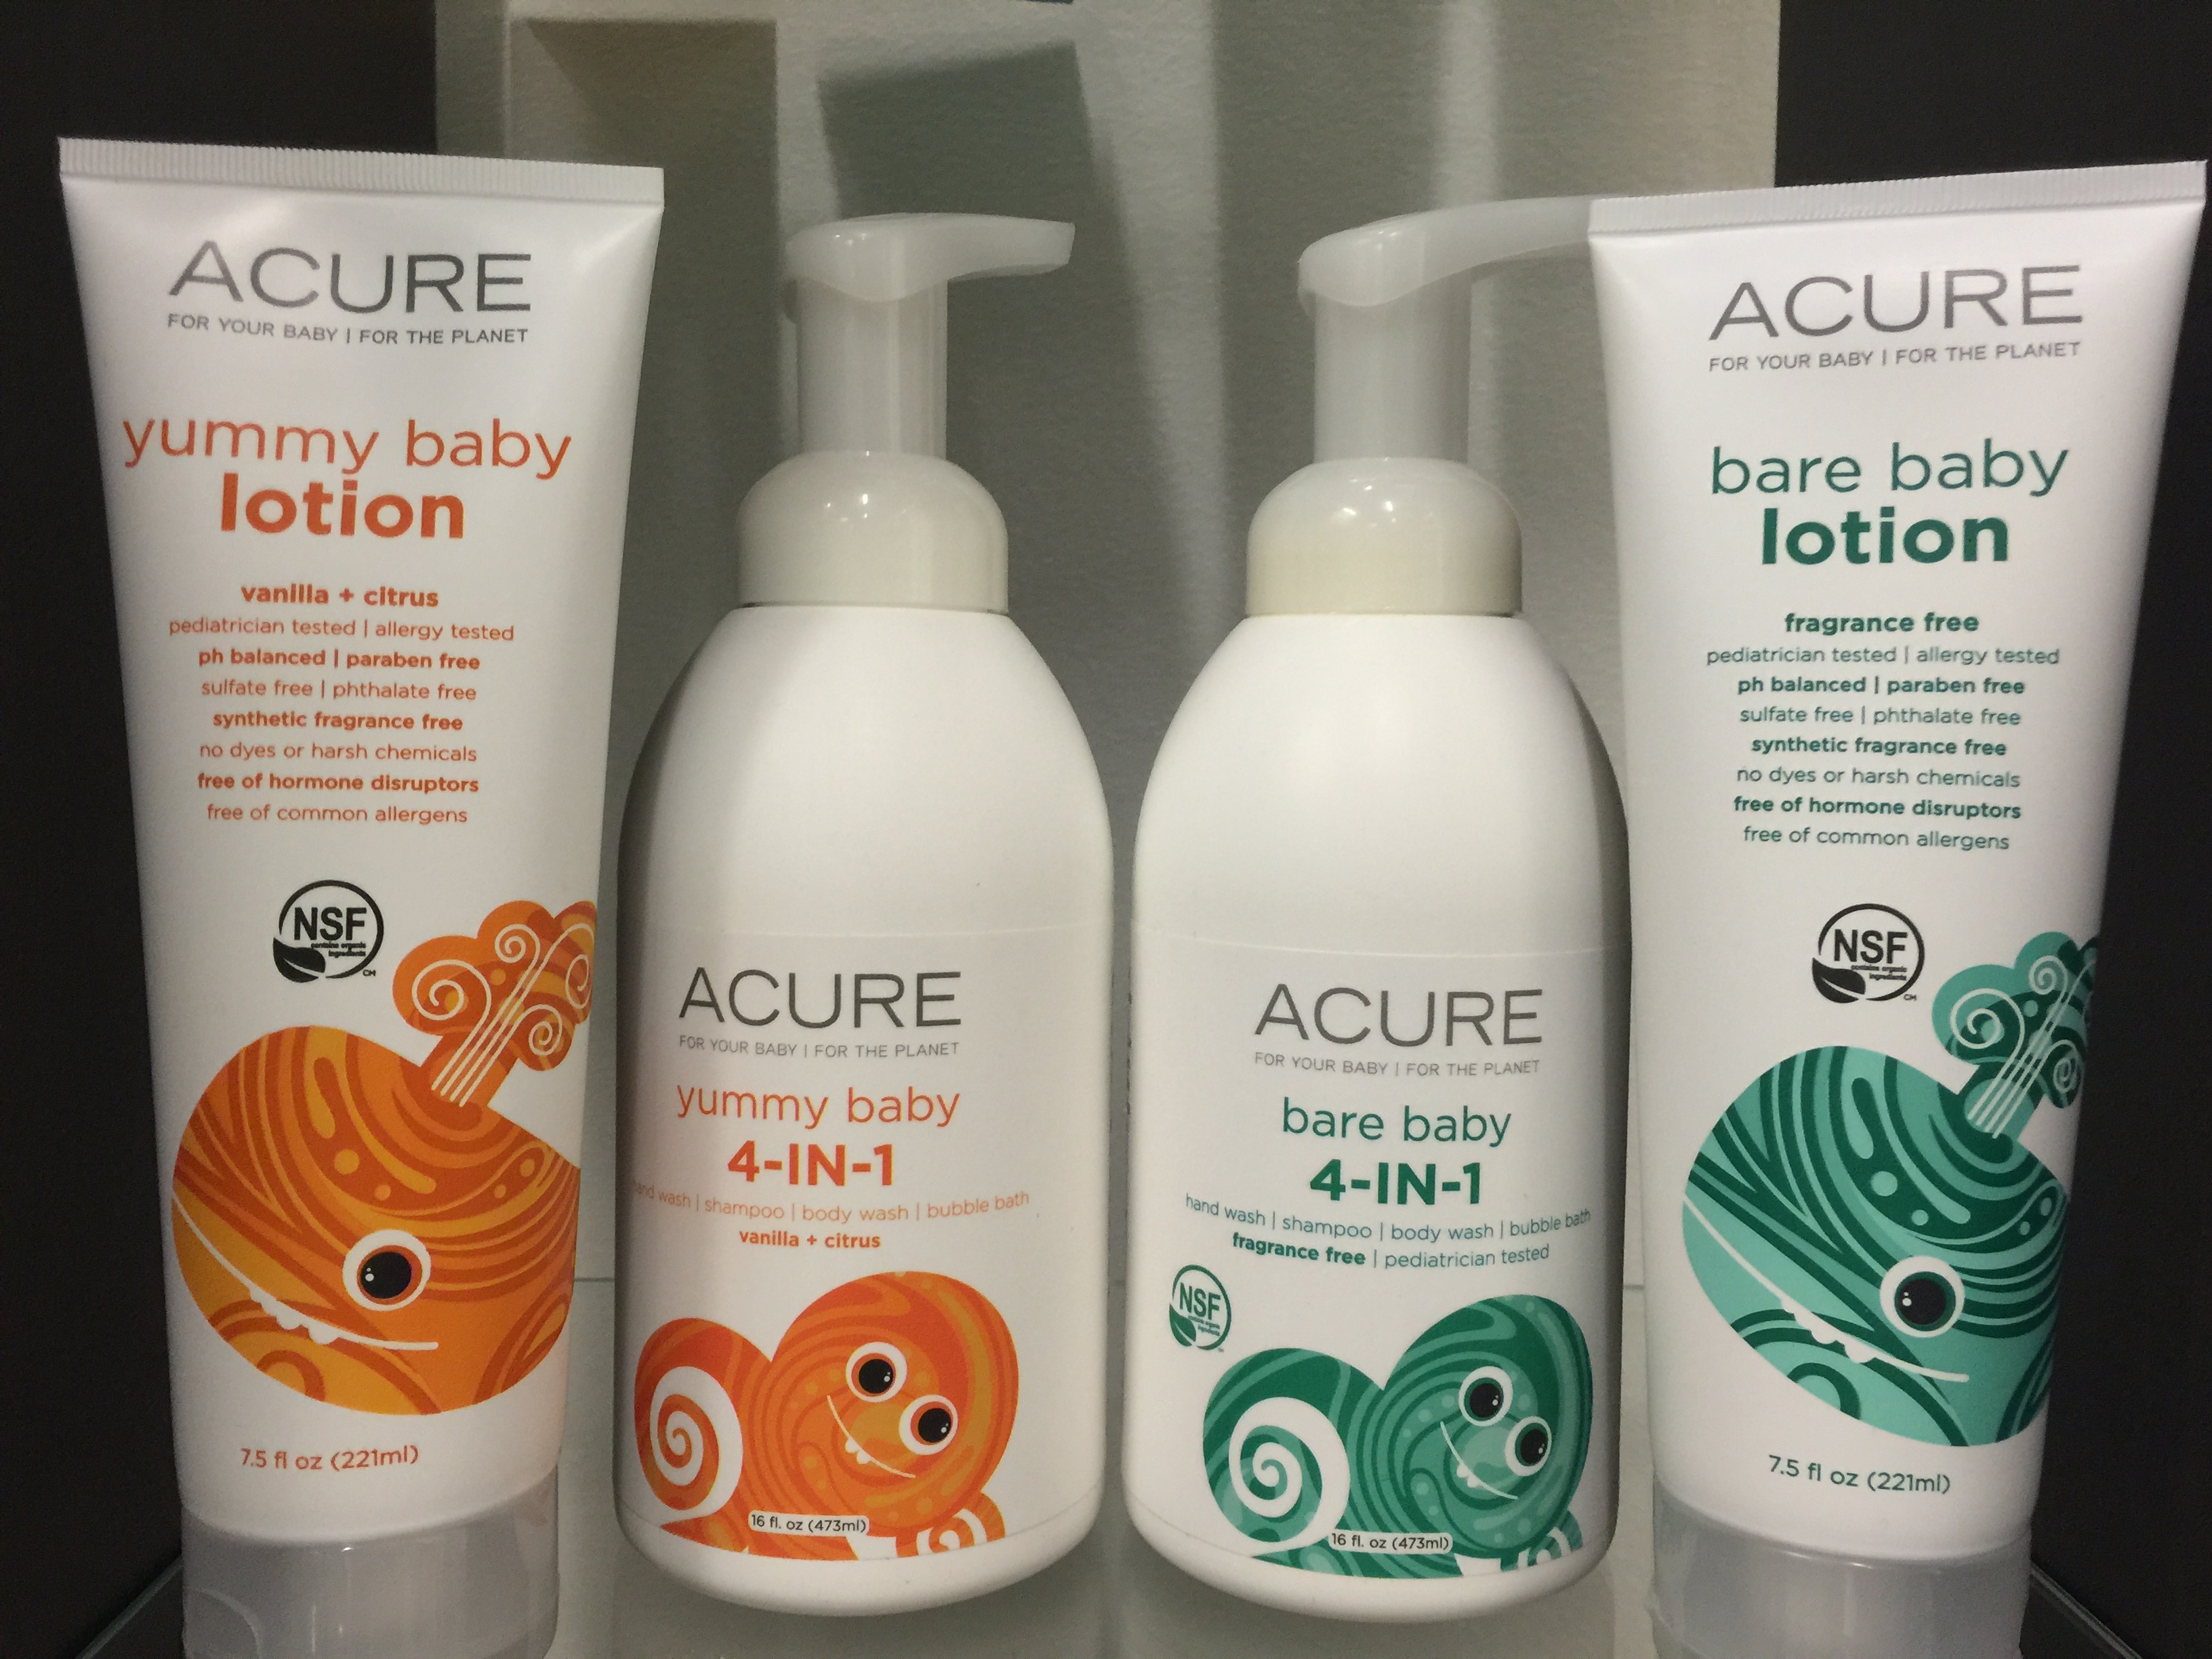 Acure Organics Launches New Baby Line – And You’ll Want to Try It, Too!